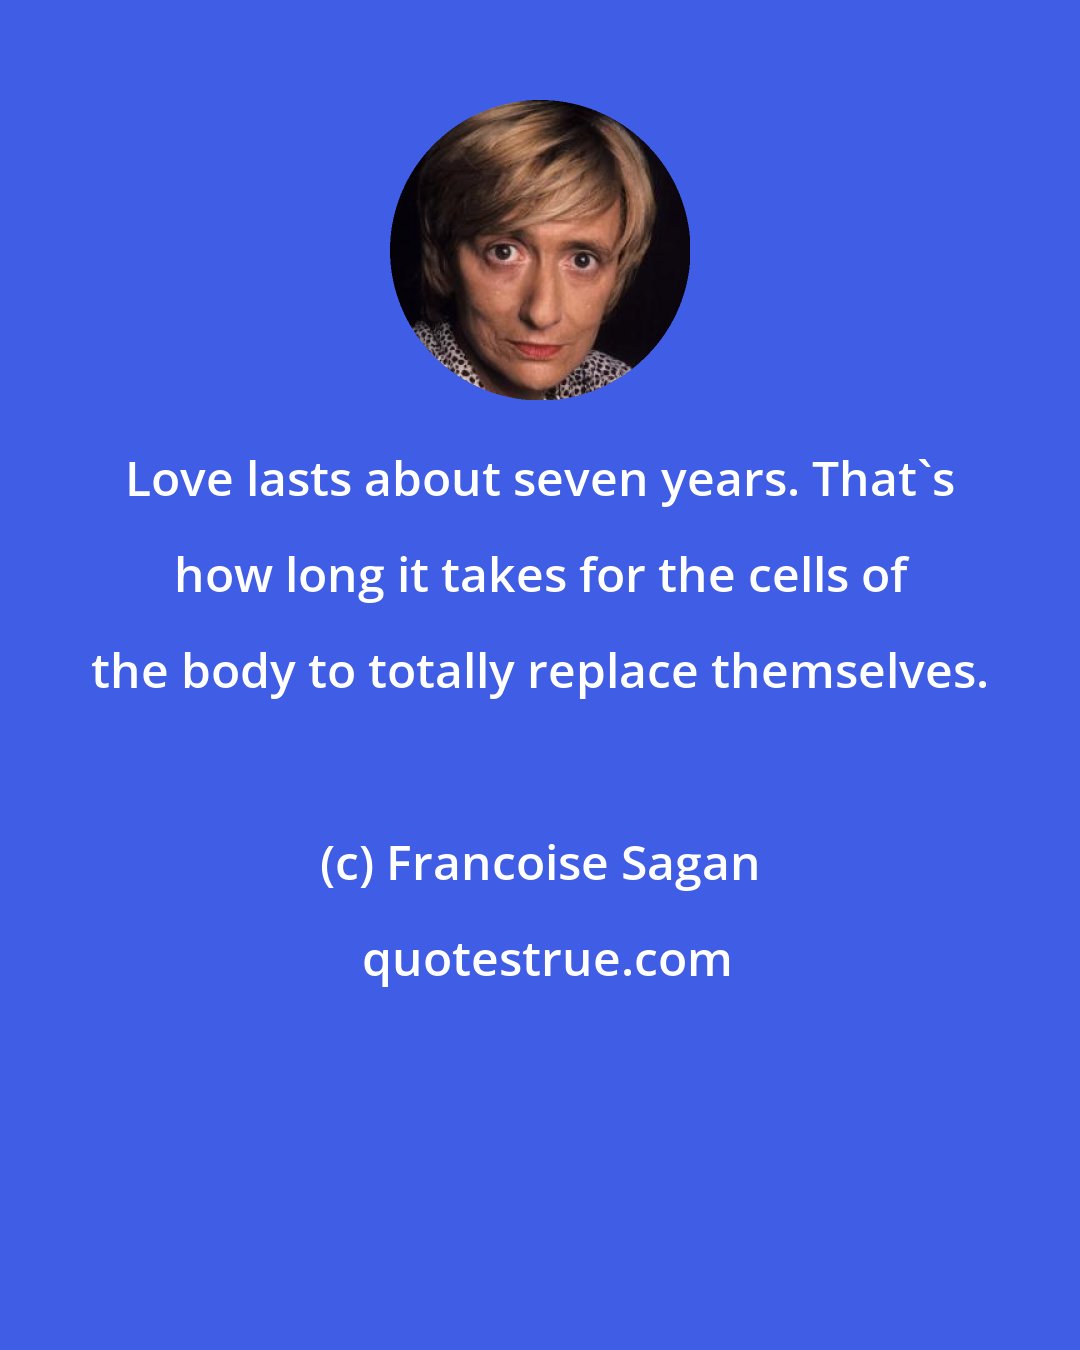 Francoise Sagan: Love lasts about seven years. That's how long it takes for the cells of the body to totally replace themselves.